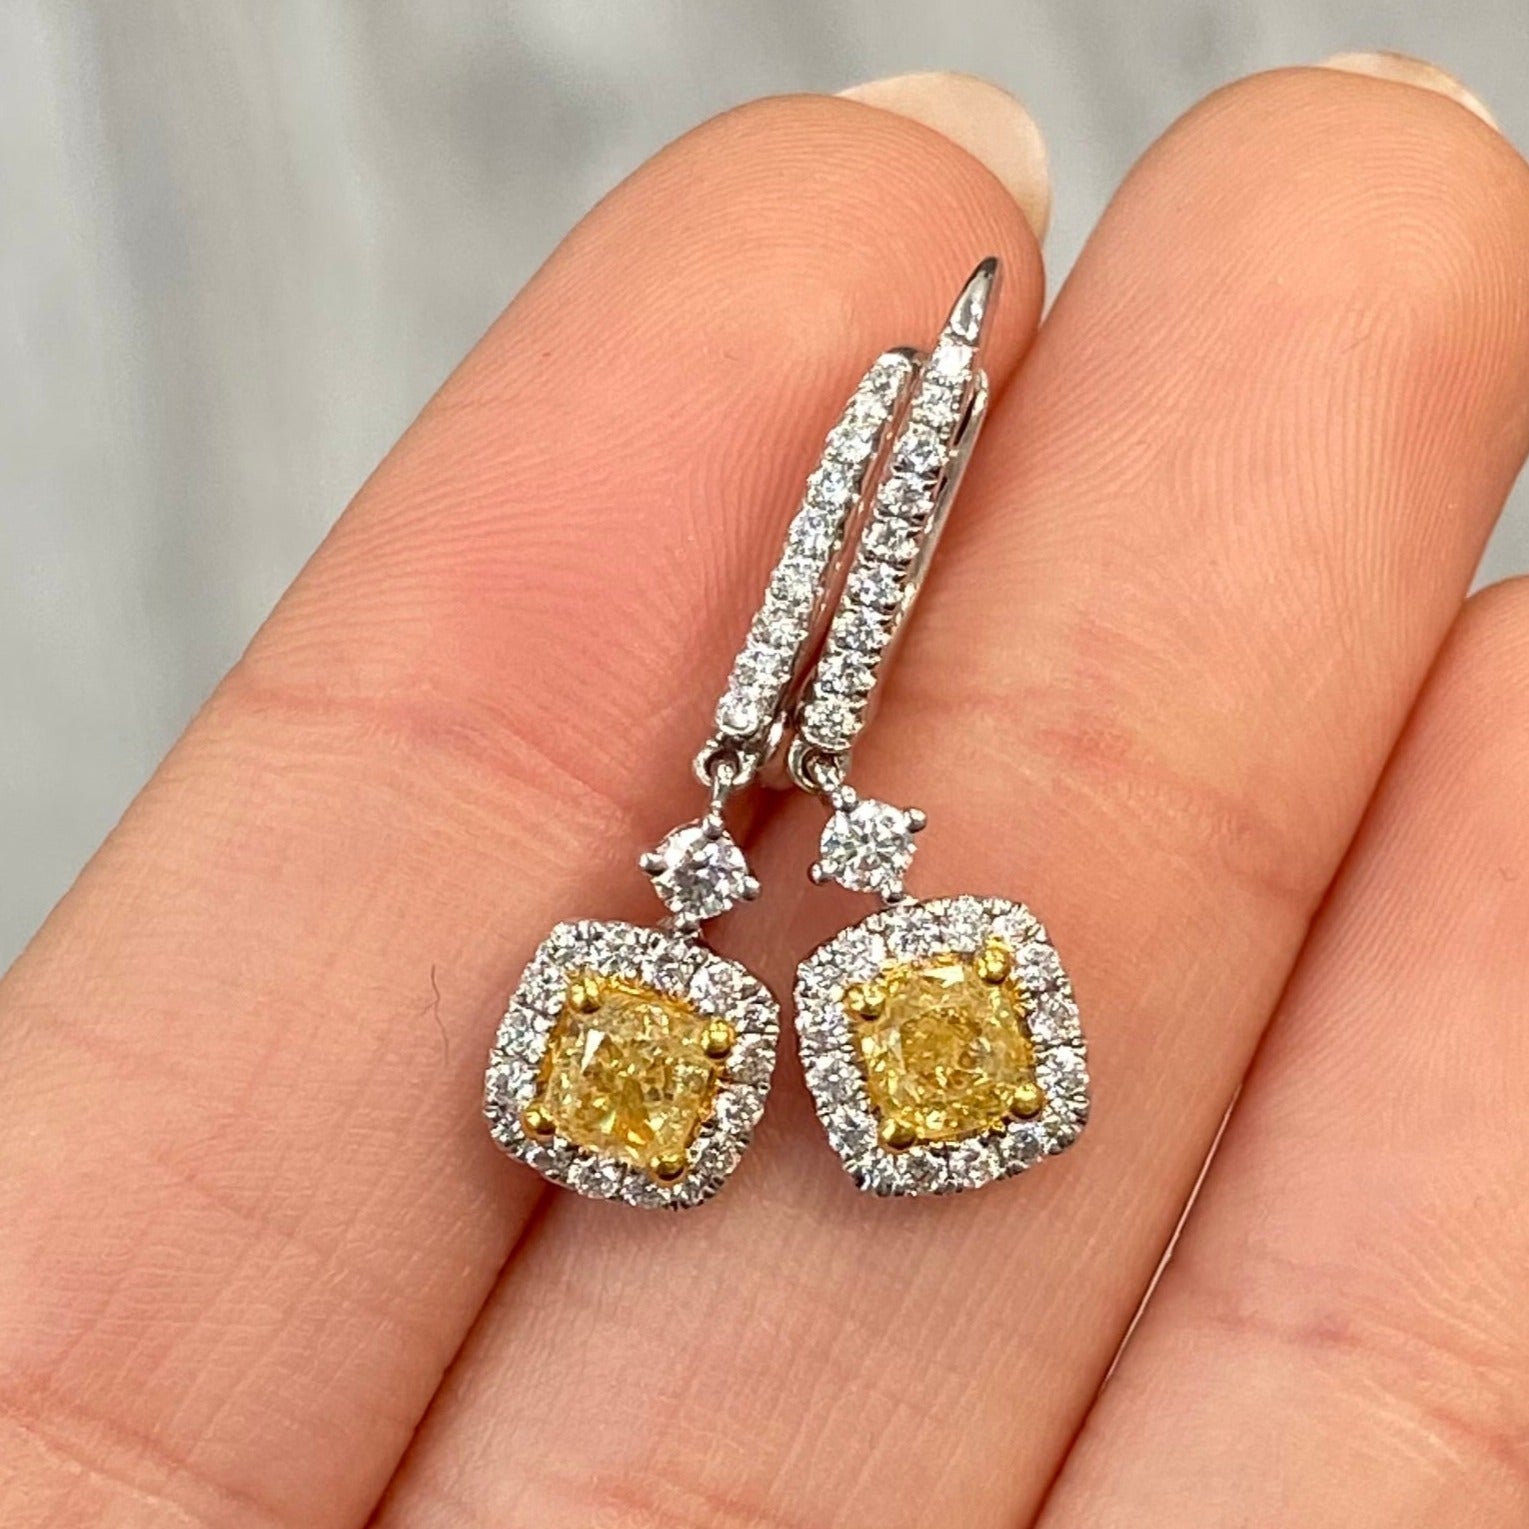 Natural canary diamond earrings in halo design